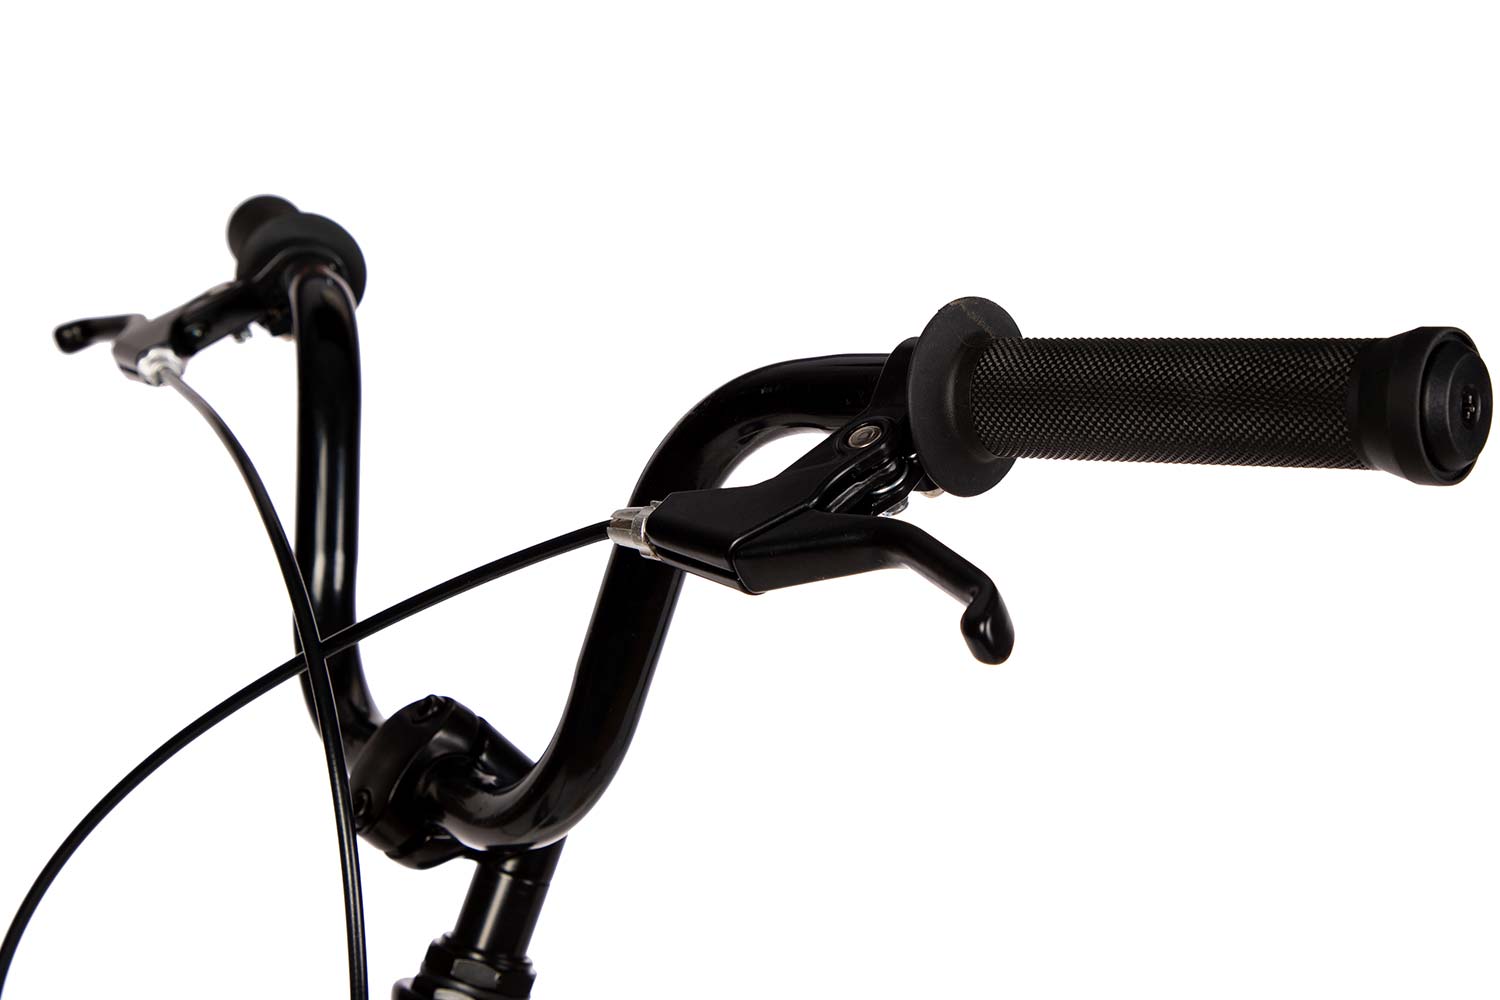 A studio detail of the handlebar and dual handbrakes on the Strider 20x Sport, a 20" all-in-one balance and pedal bike